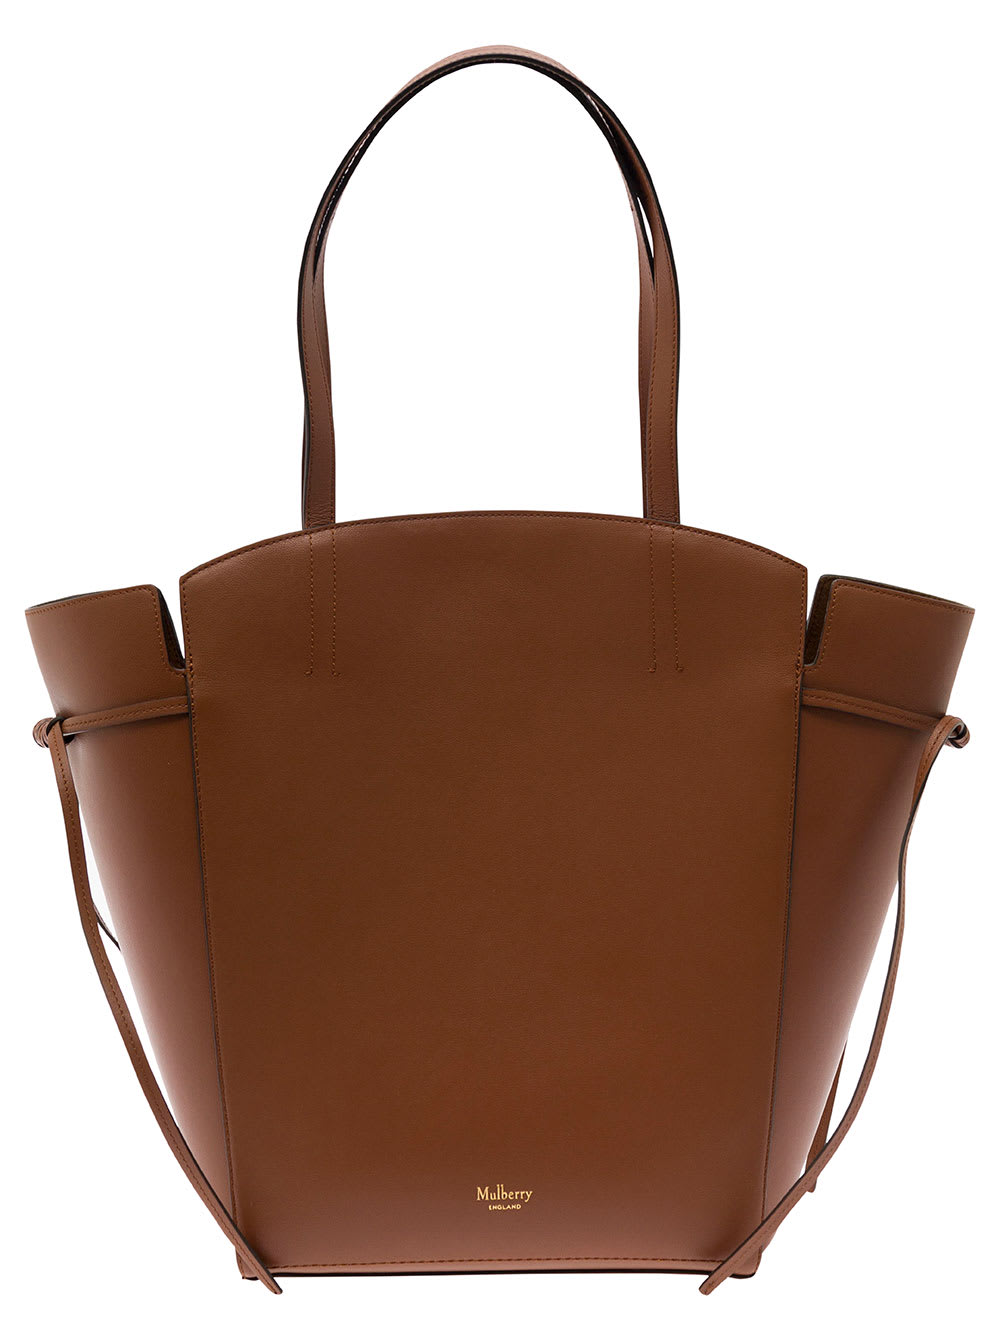 MULBERRY CLOVELLY BROWN SHOULDER BAG WITH LAMINATED LOGO IN SMOOTH LEATHER WOMAN